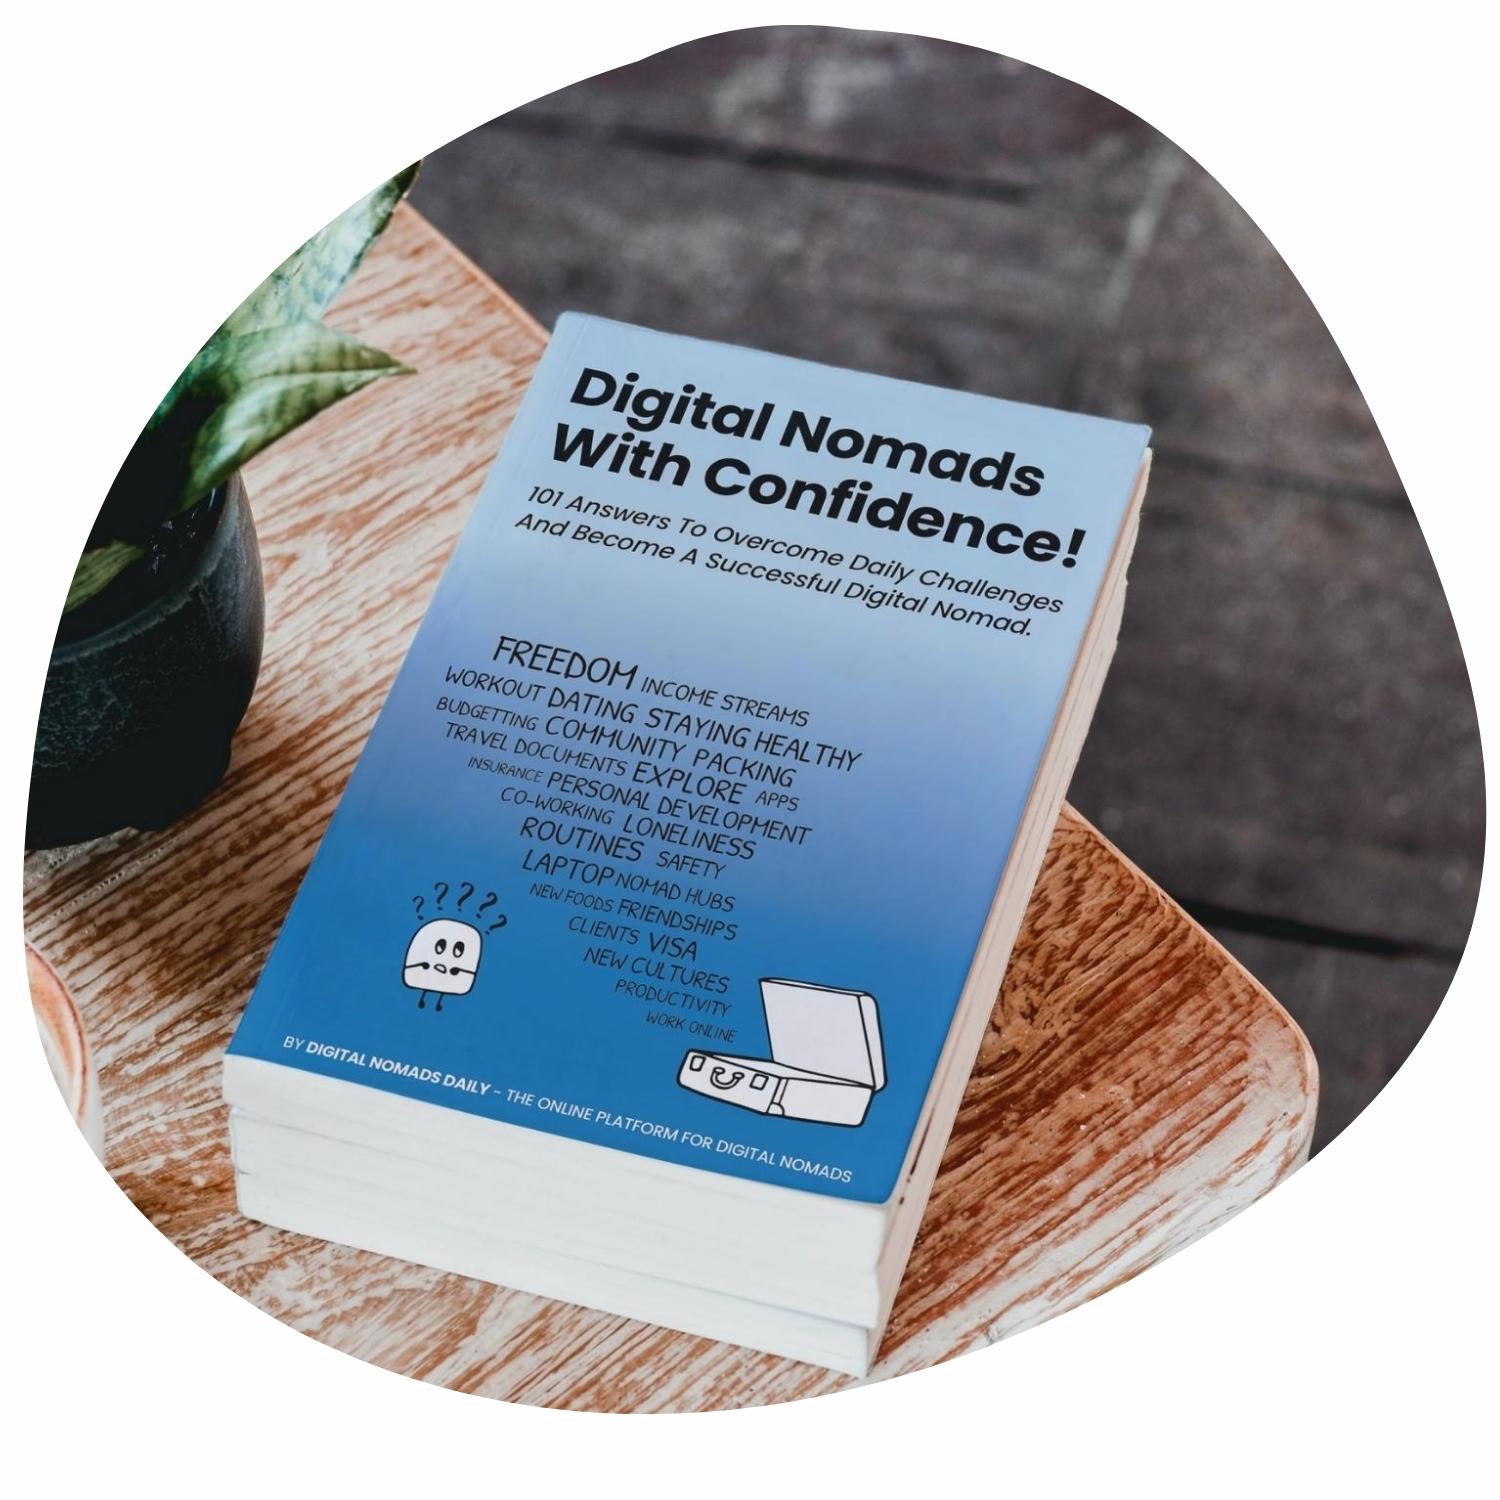 Digital Nomads With Confidence 101 Answers To Create A Successful Digital Nomad Life